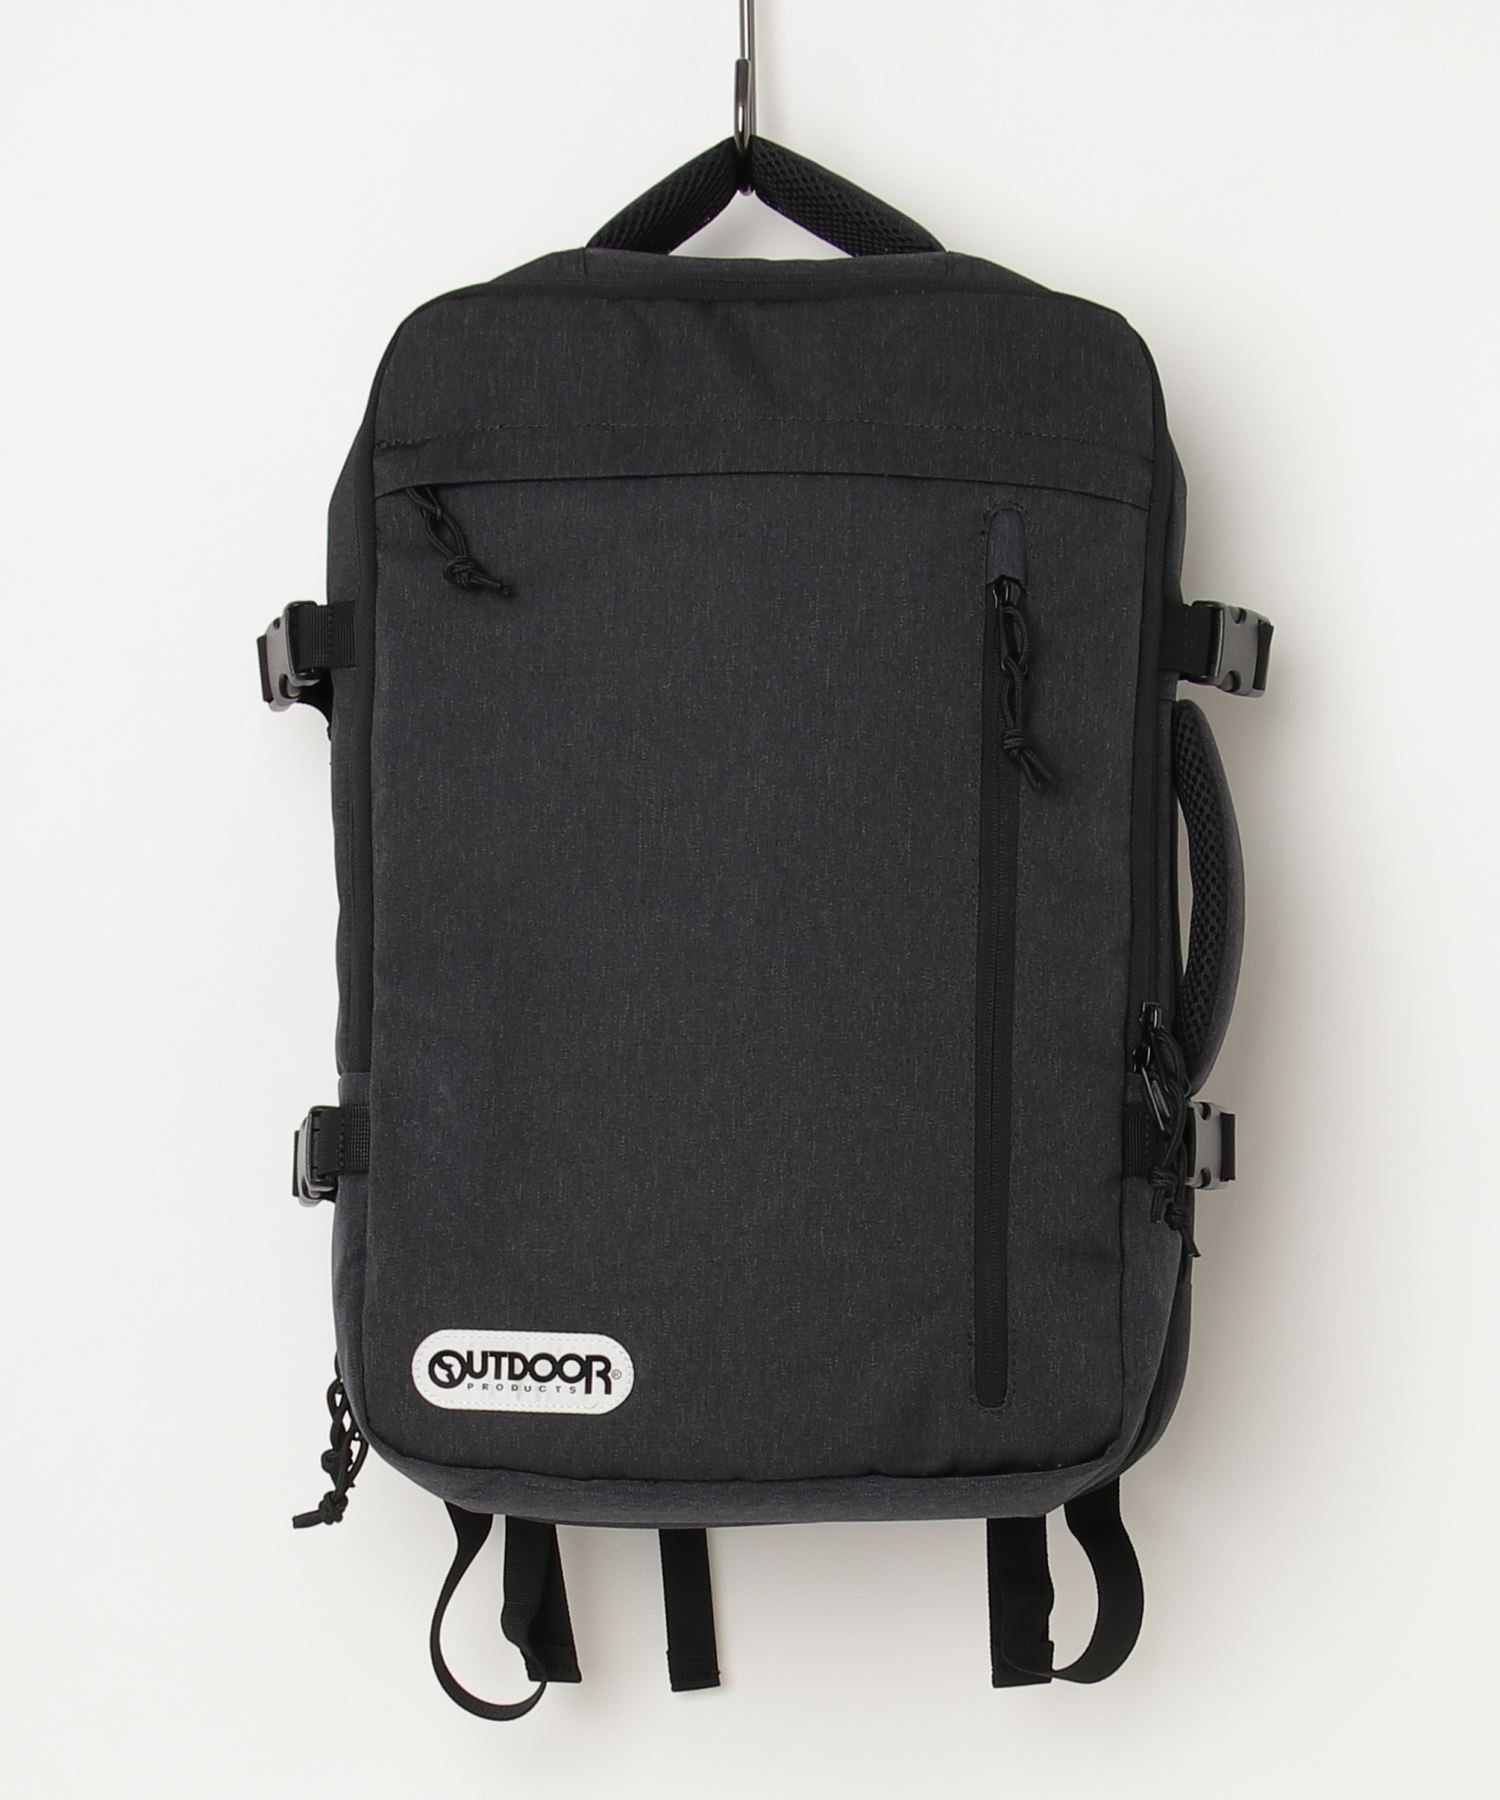 TRAVEL BACKPACK バックパック OUTDOOR PRODUCTS│アウトドアプロダクツ（OUTDOOR PRODUCTS）公式通販サイト